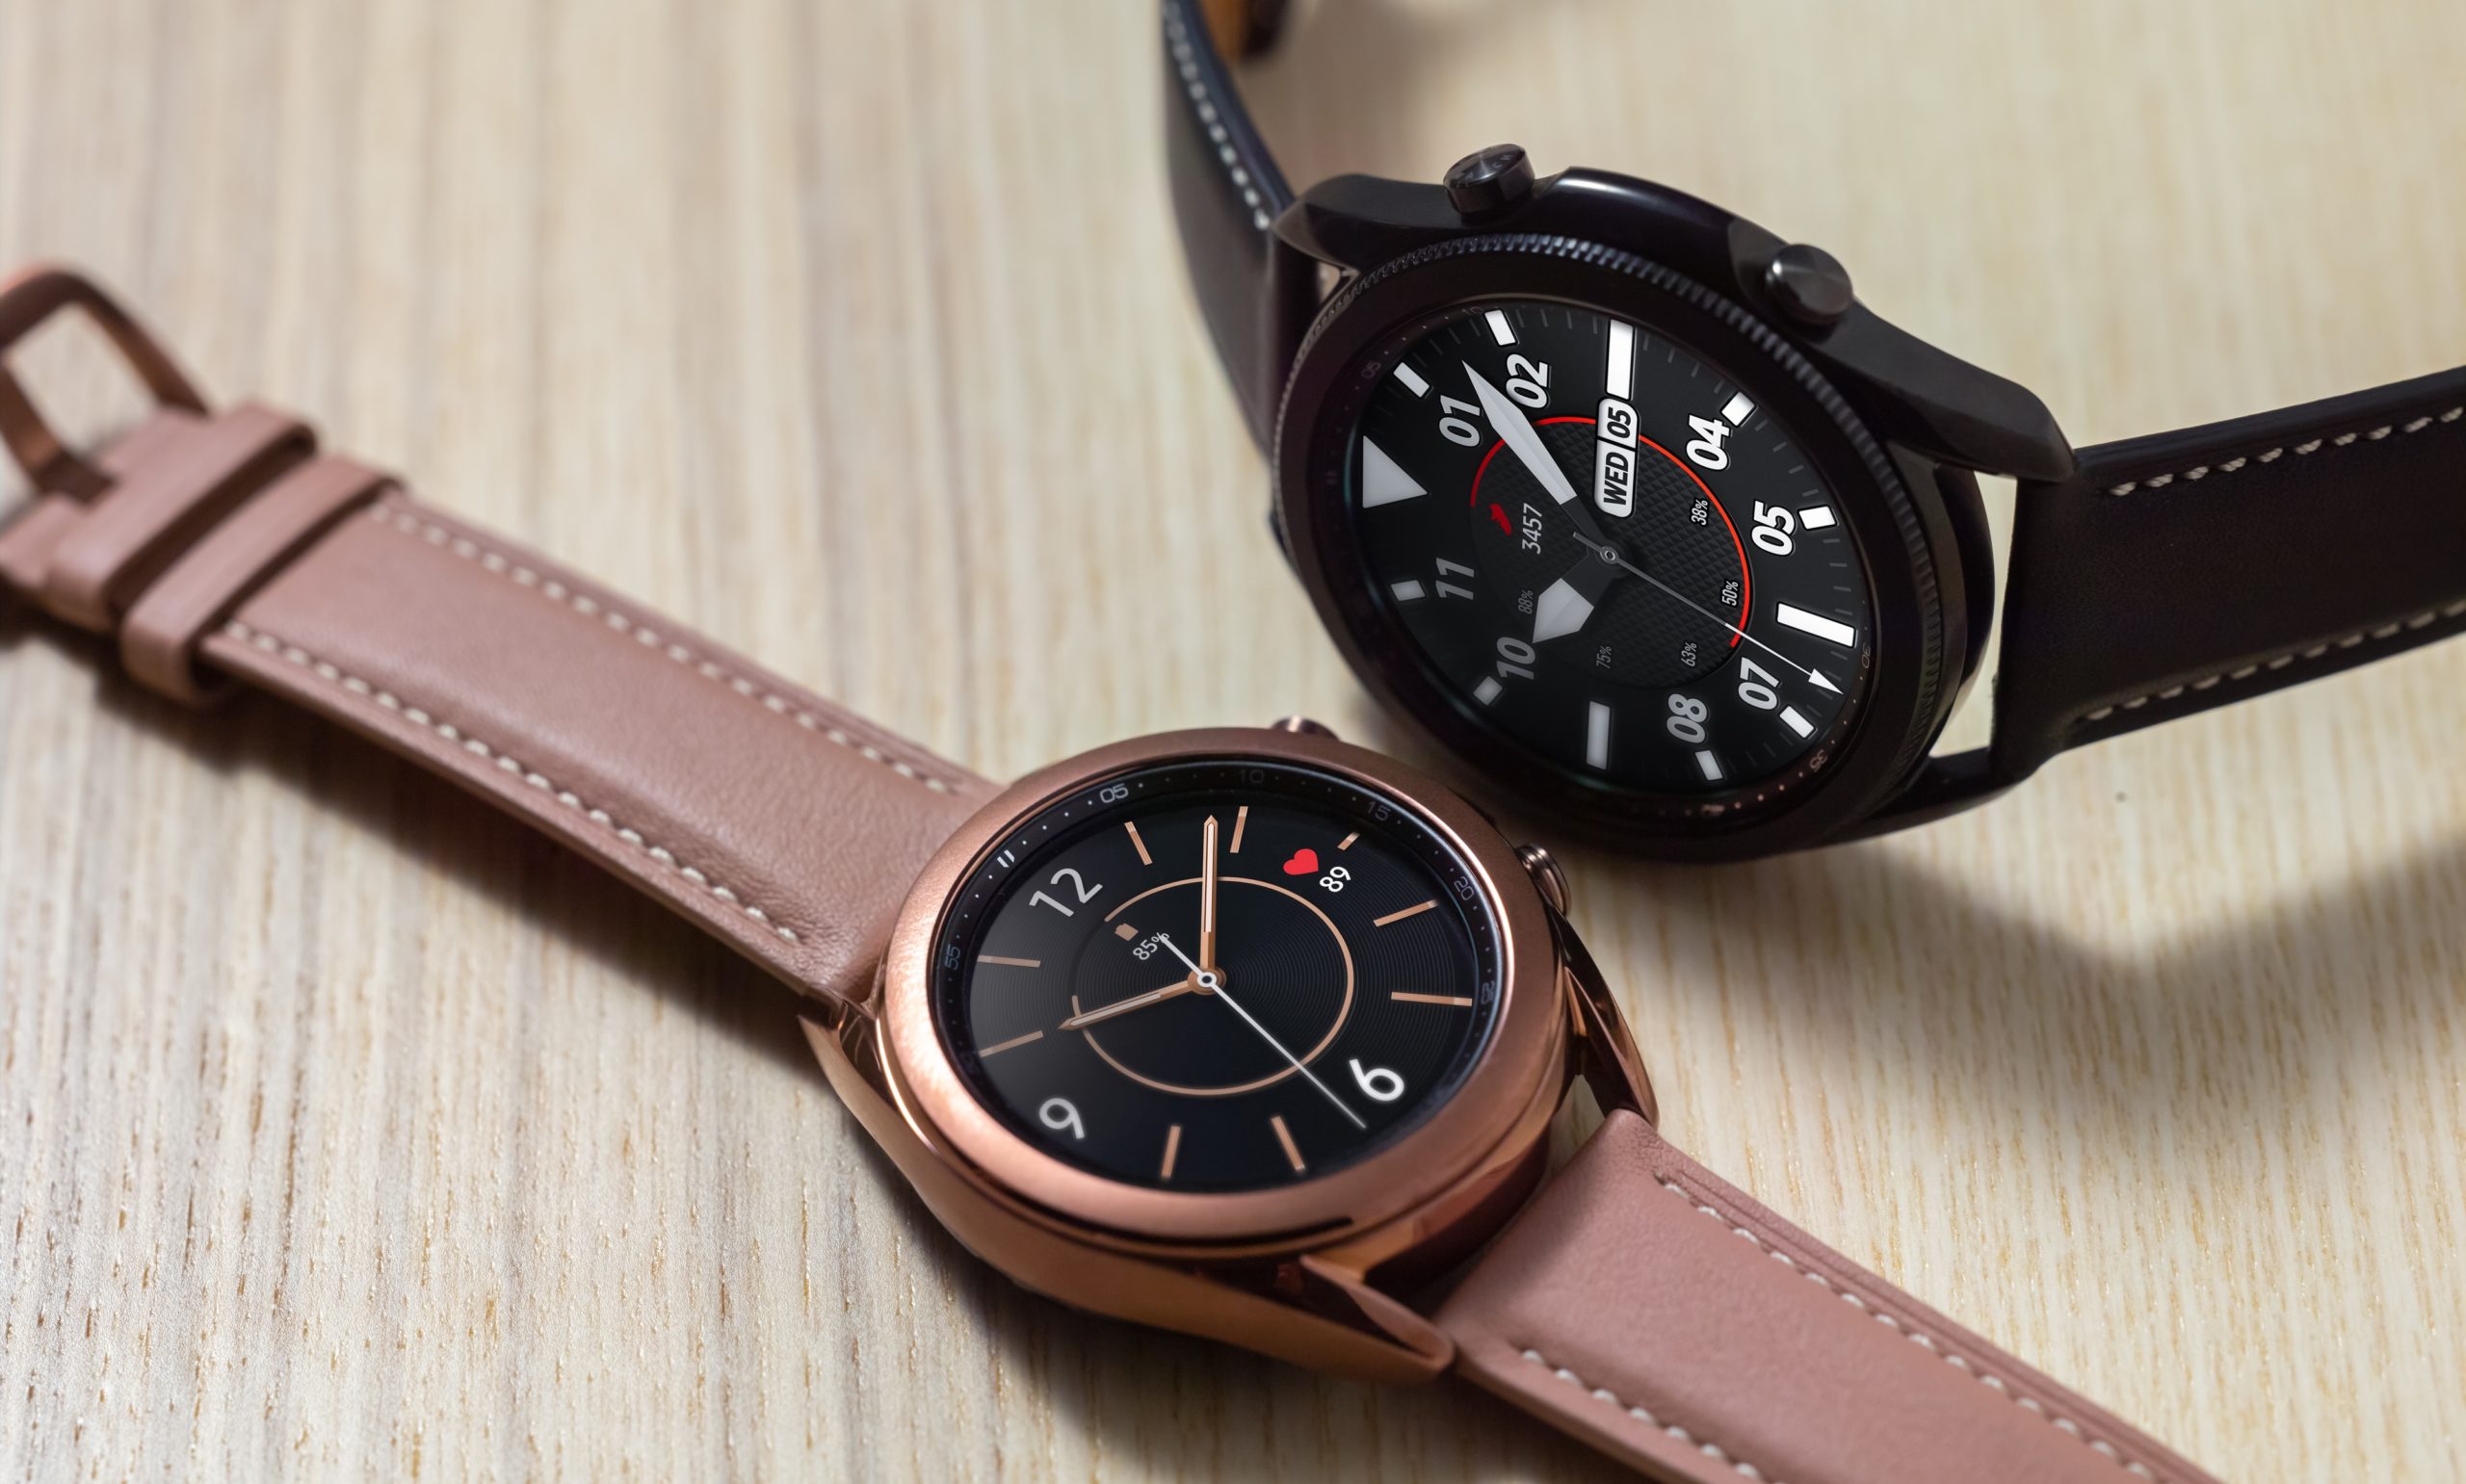 Samsung Galaxy Watch 3, Apple Watch Series 6 and more are on sale